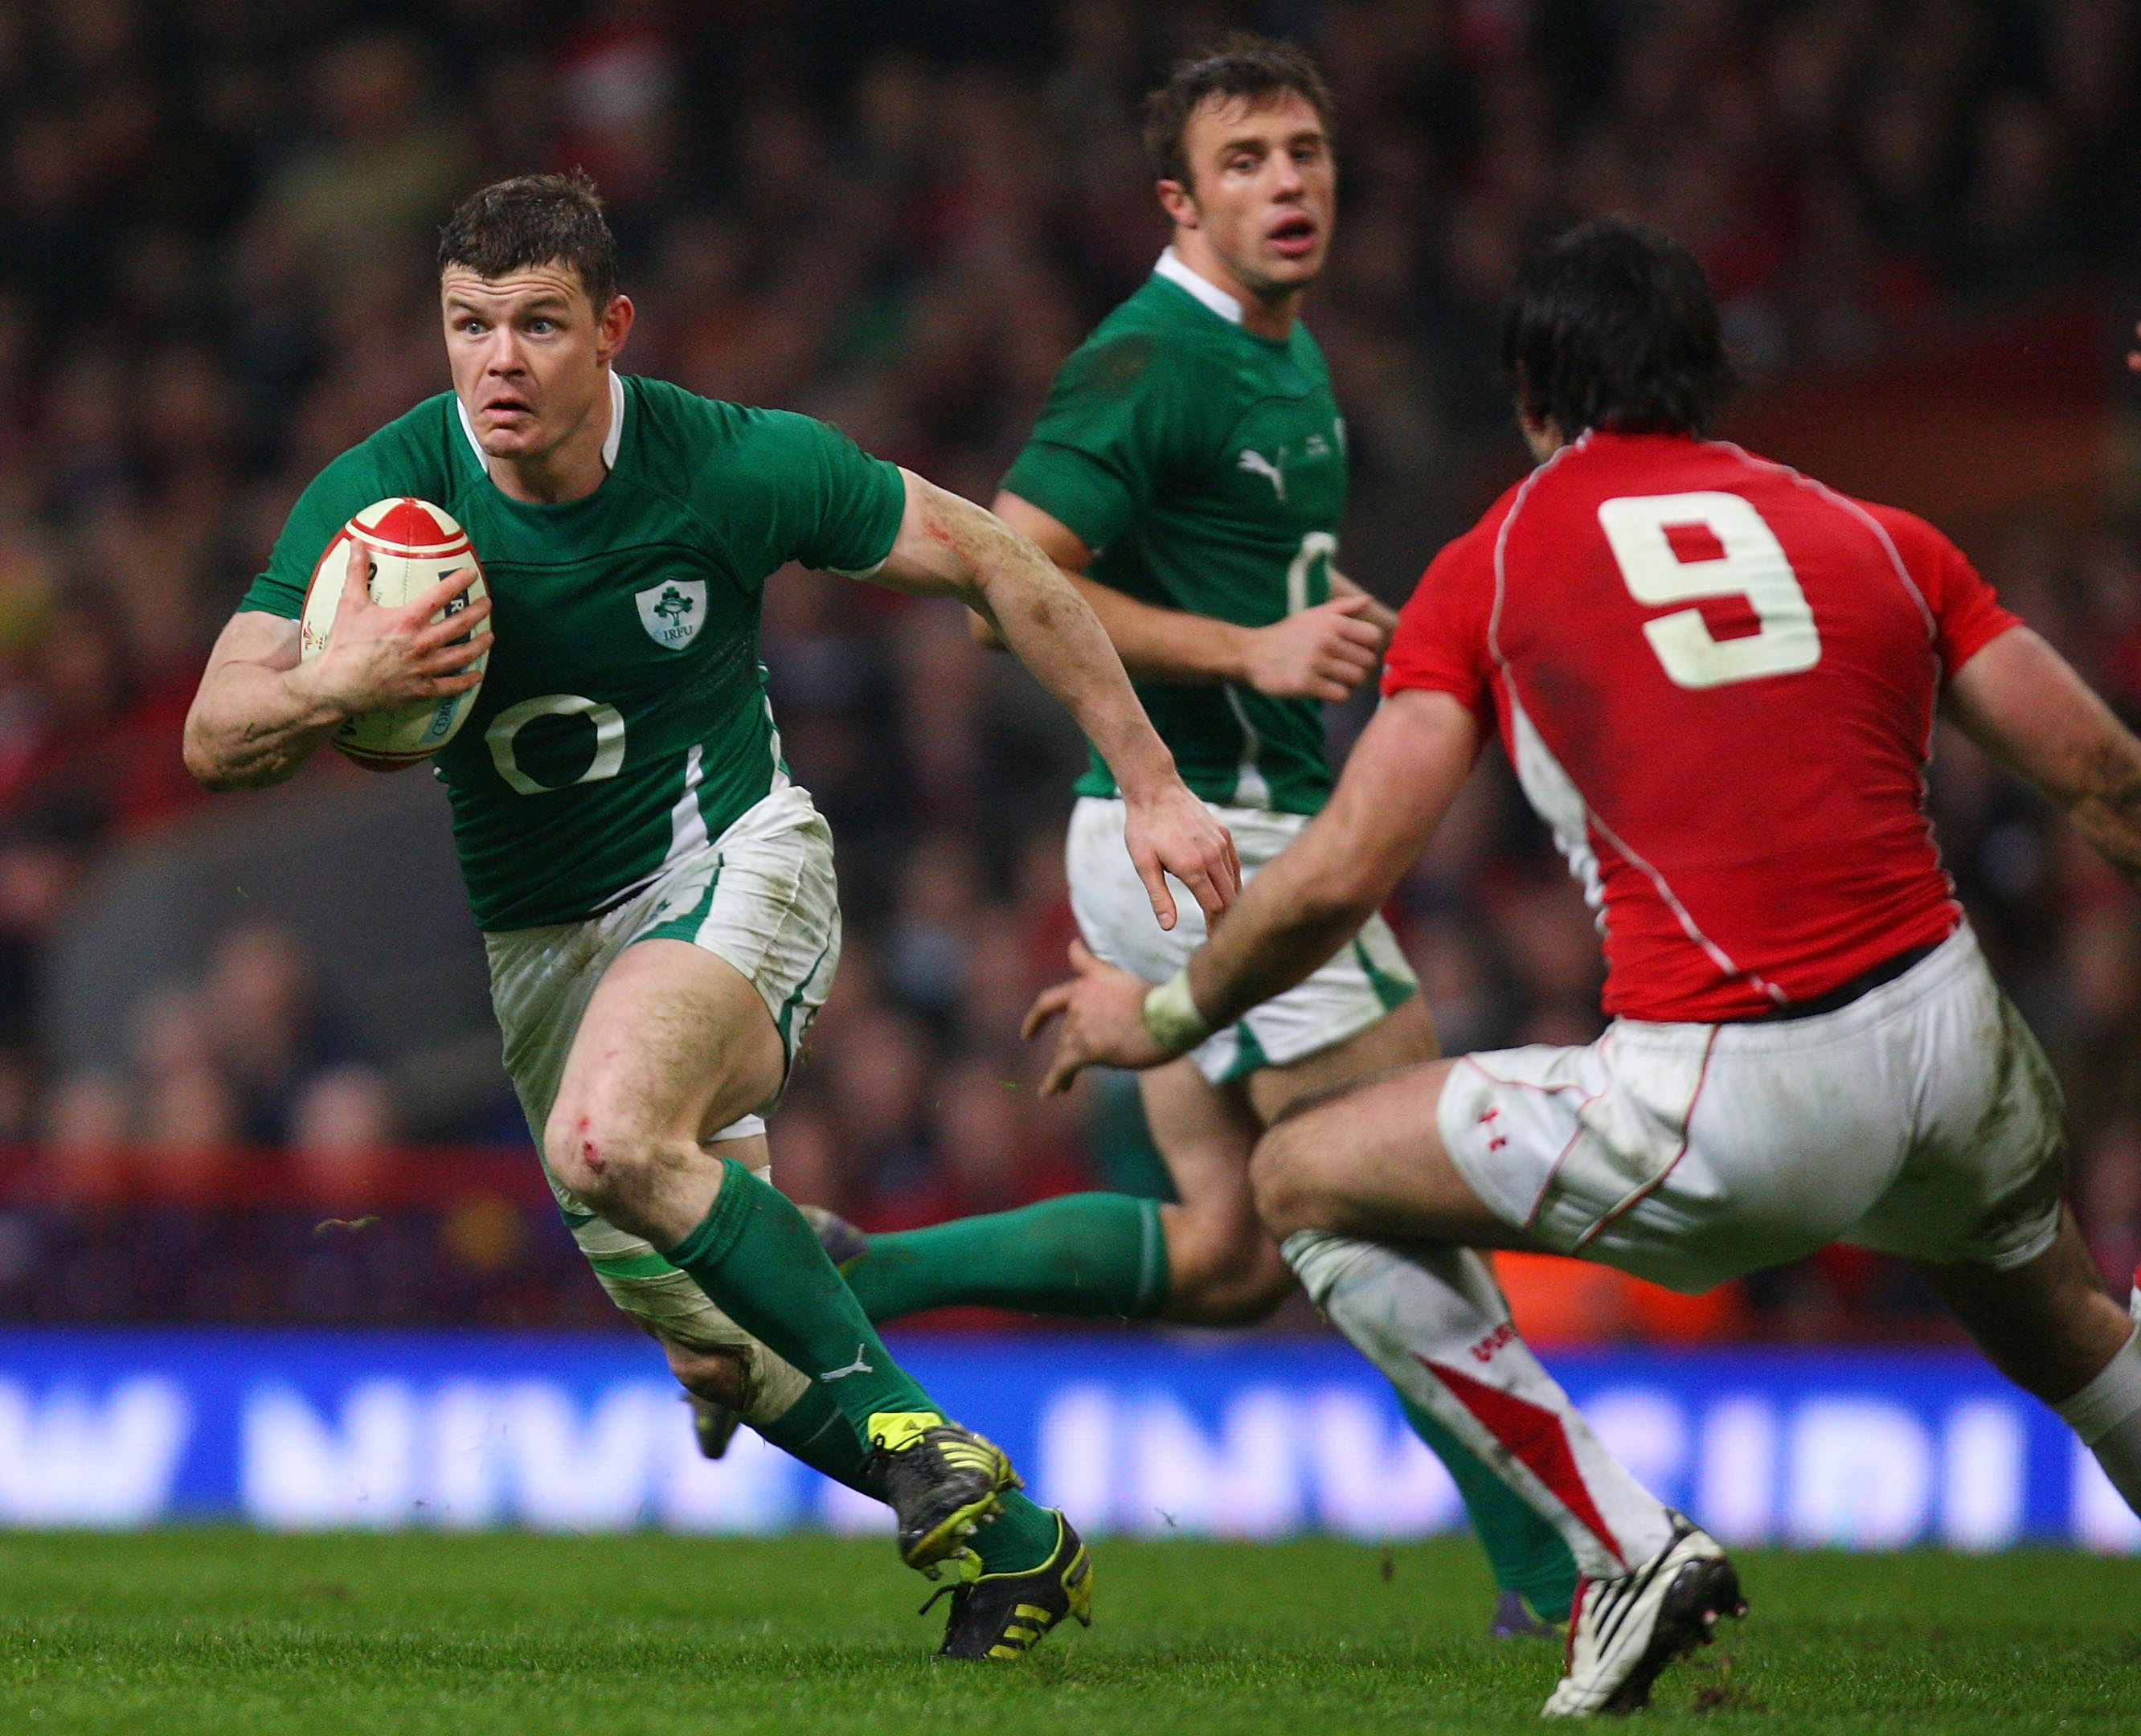 CARDIFF, WALES - MARCH 12:  Ireland captain Brian O' Driscoll in action during the RBS Six Nations Championship match between Wales and Ireland at the Millennium Stadium on March 12th, 2011 in Cardiff, Wales.  (Photo by Stu Forster/Getty Images)